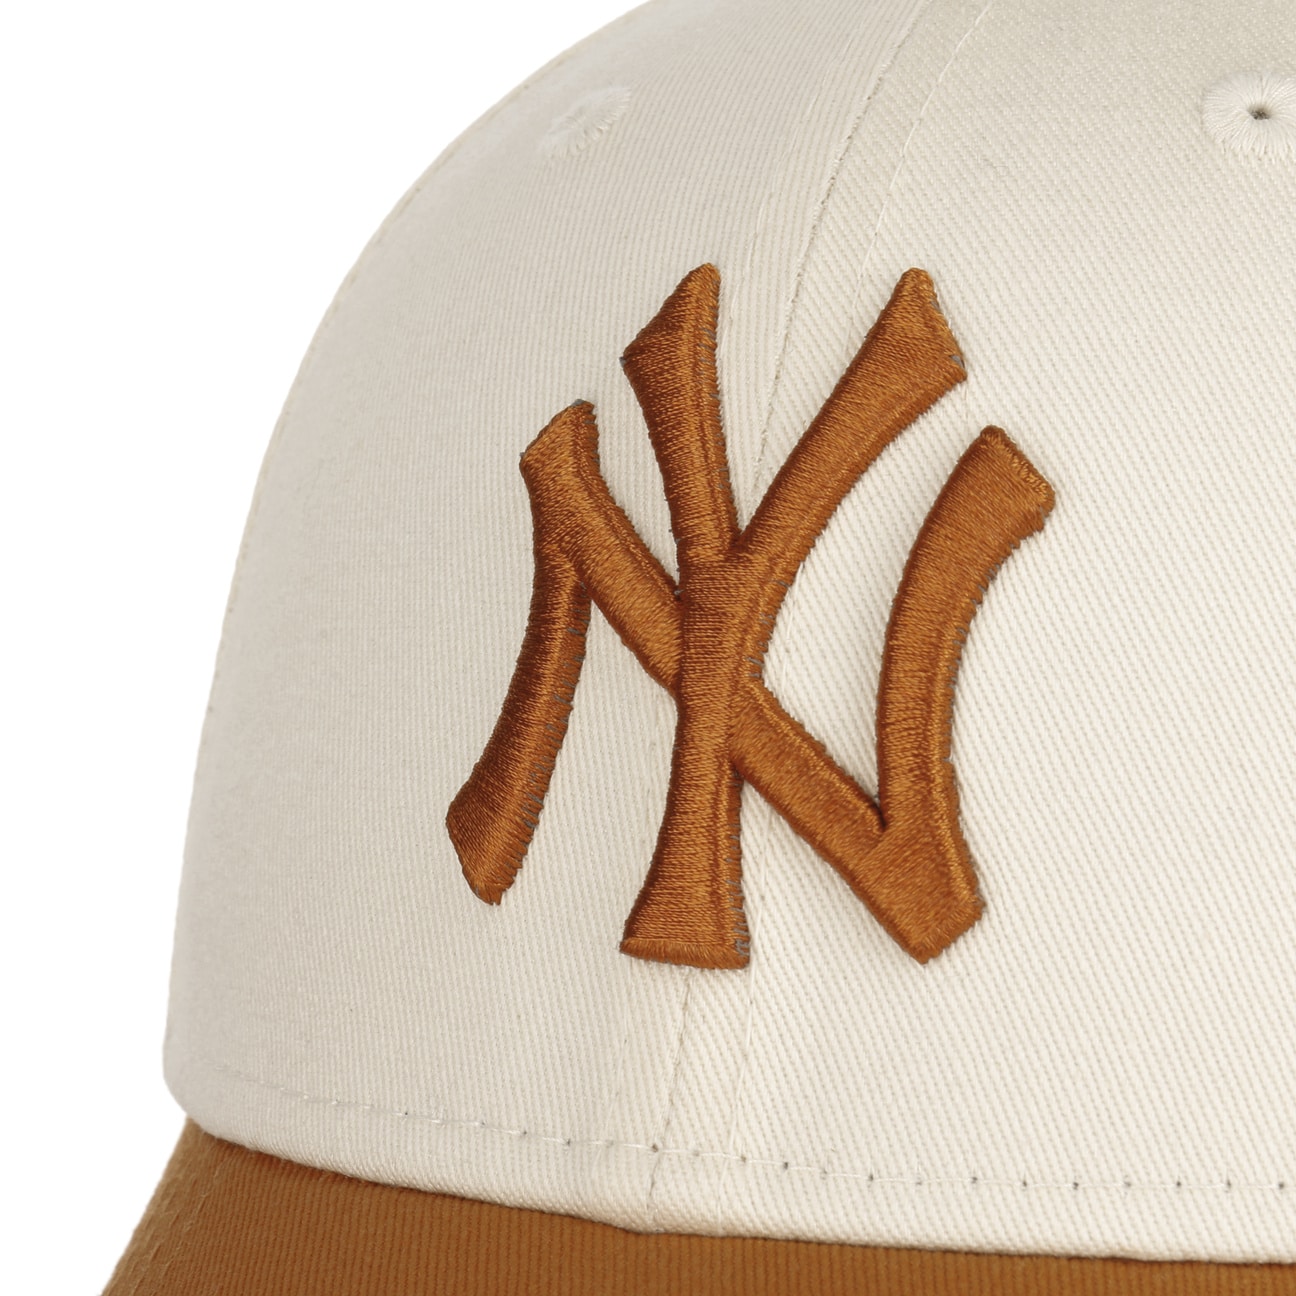 9Forty Cooperstown Yankees Cap by New Era